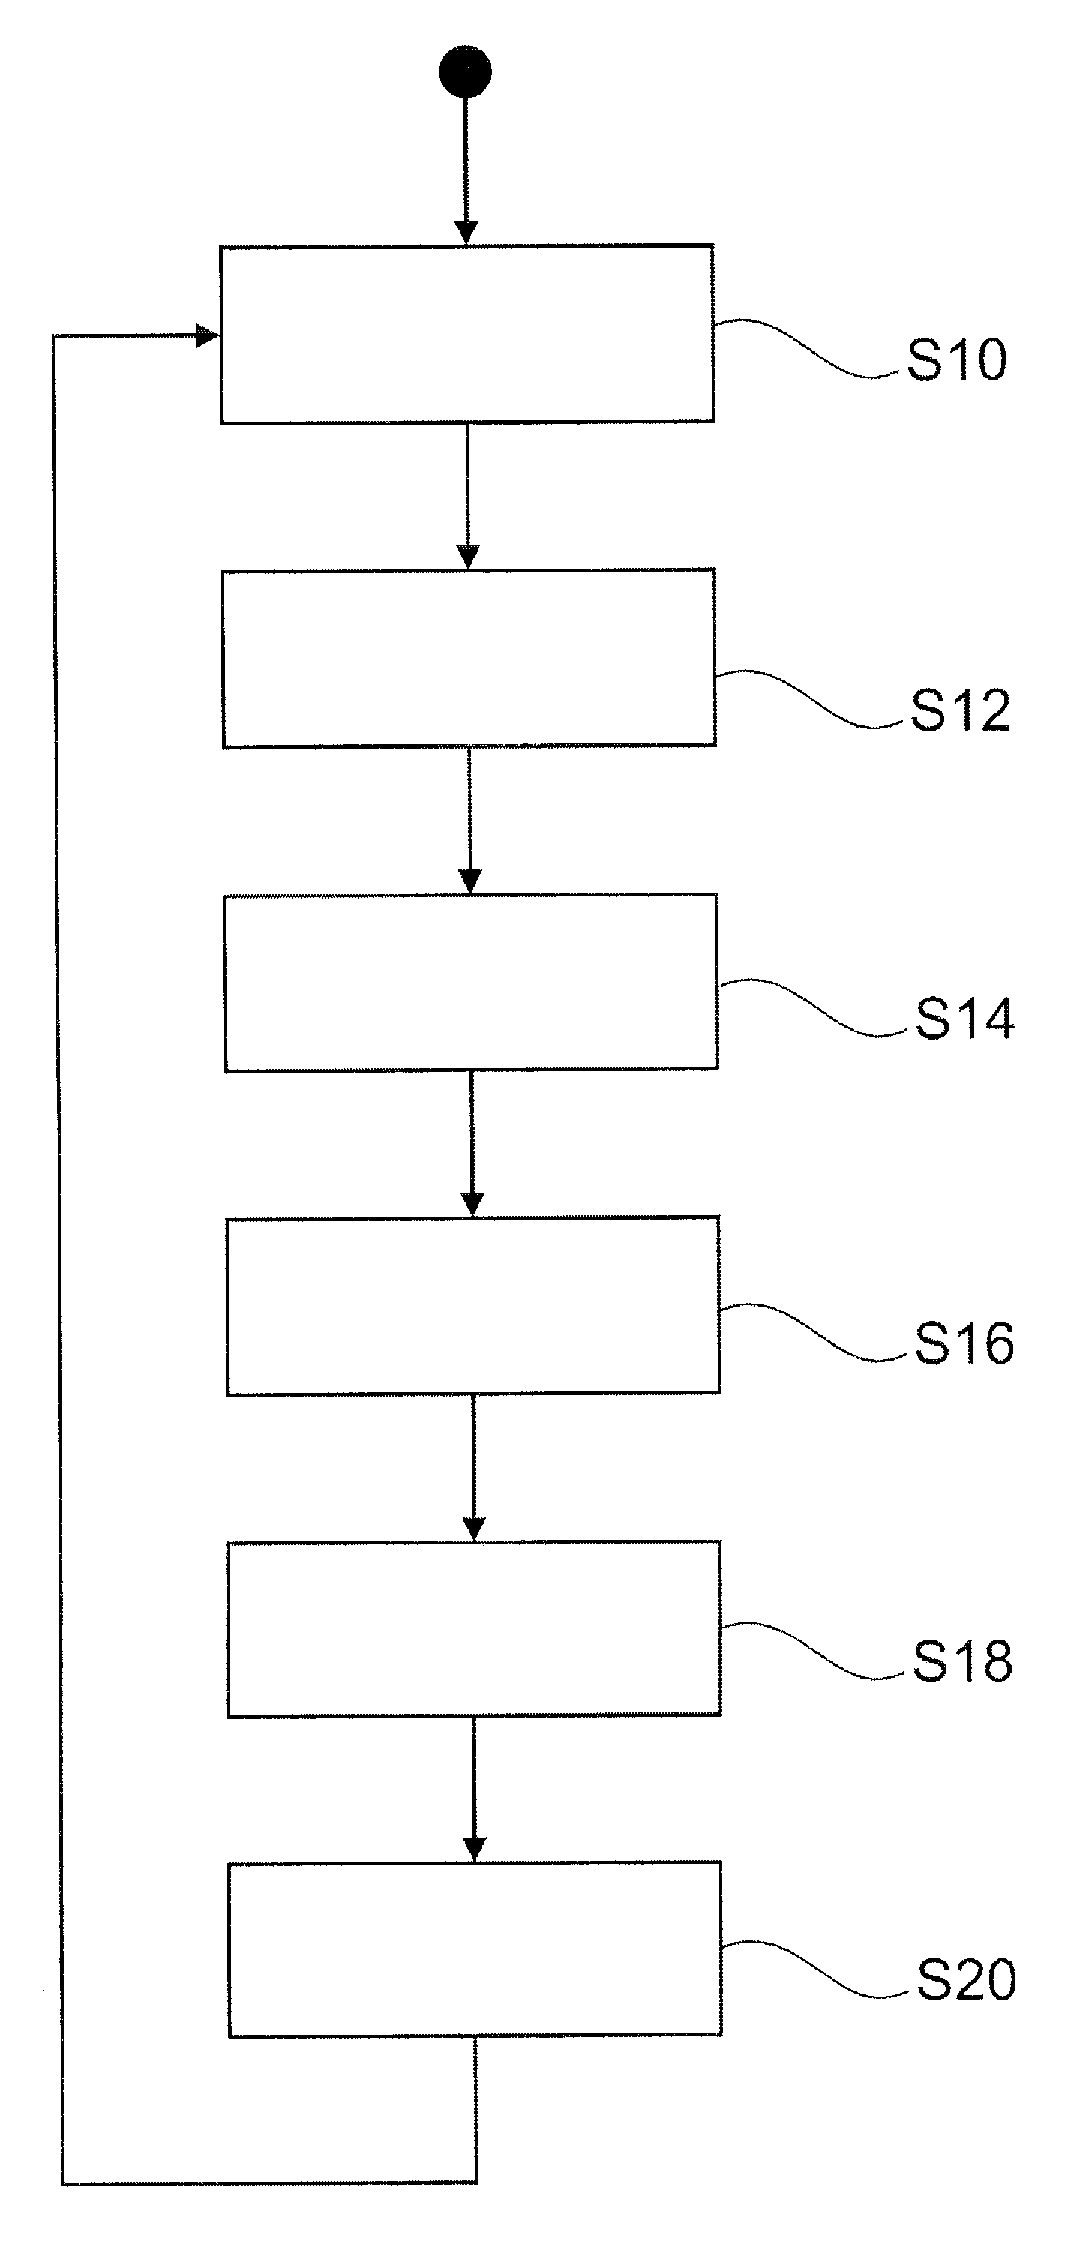 Energy Saving Control for a Field Device